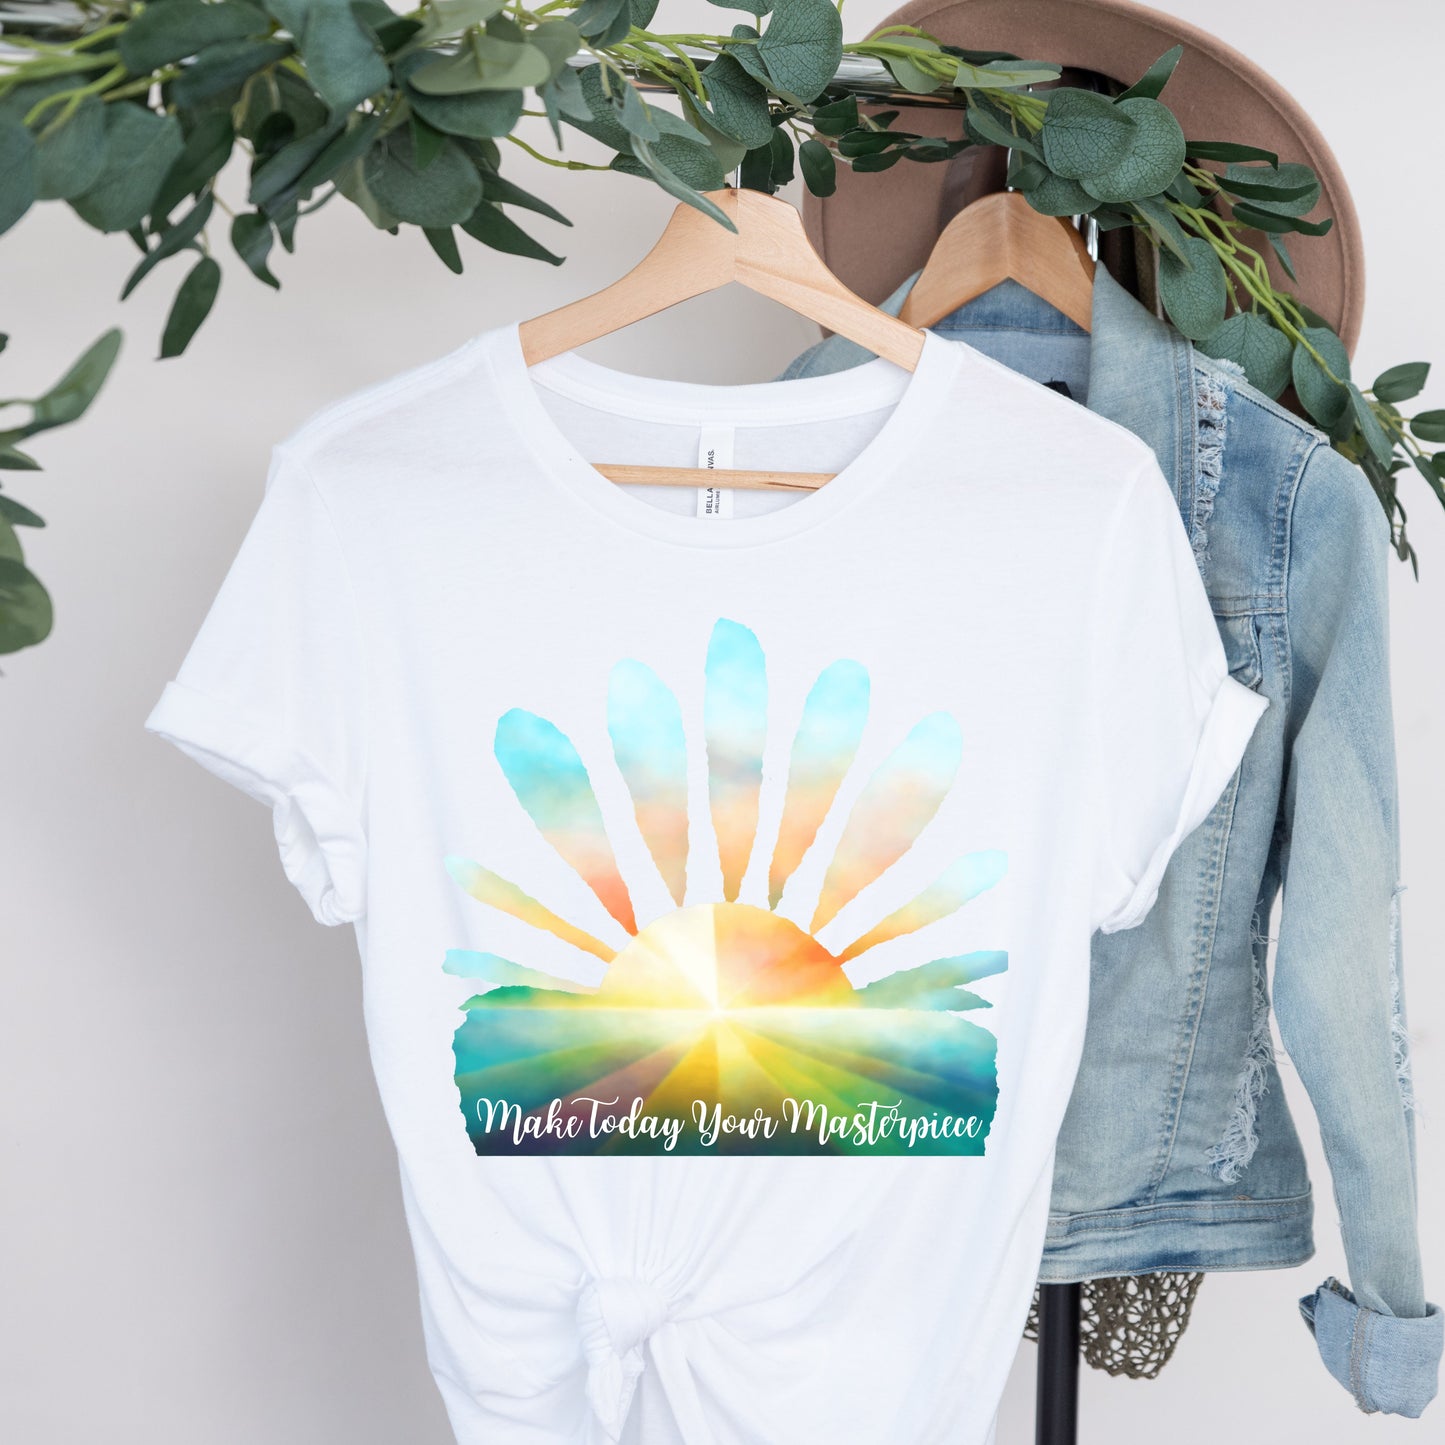 Make Today Your Masterpiece:  Short Sleeve T-Shirt